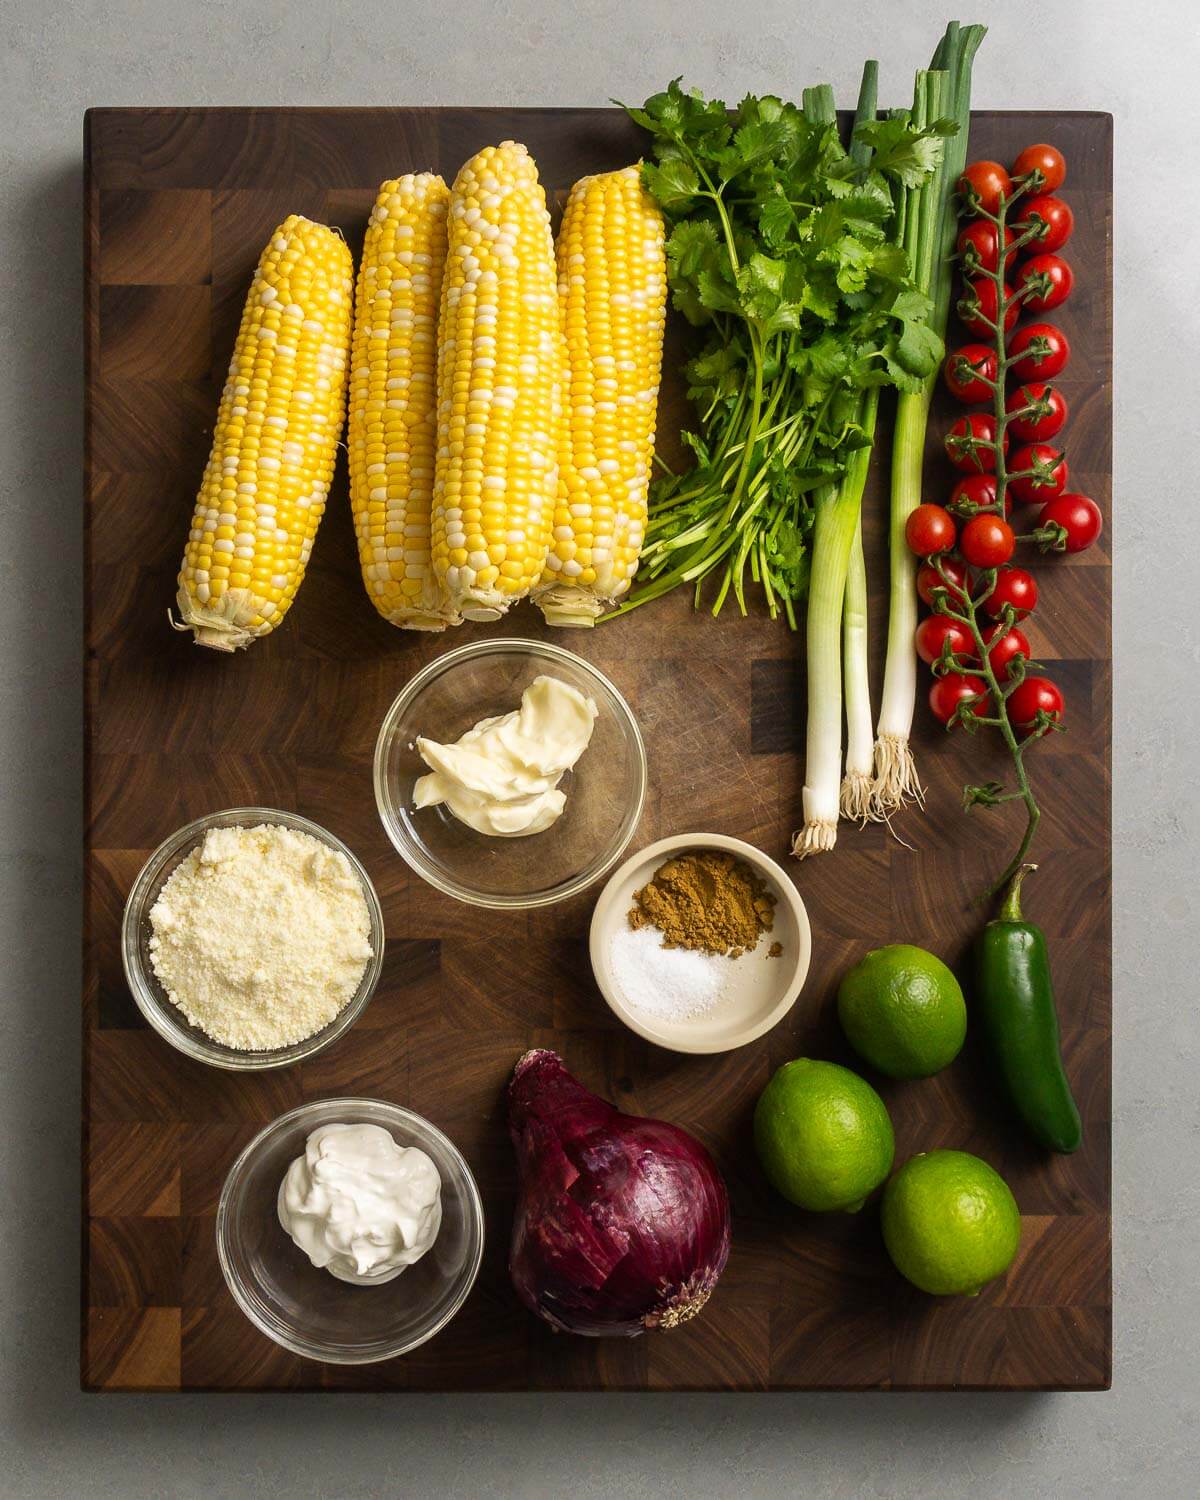 Ingredients shown: corn cobs, cilantro, green onion, cherry tomatoes, cotija cheese, mayonnaise, salt, cumin, sour cream, red onion, limes, and jalapeno pepper.